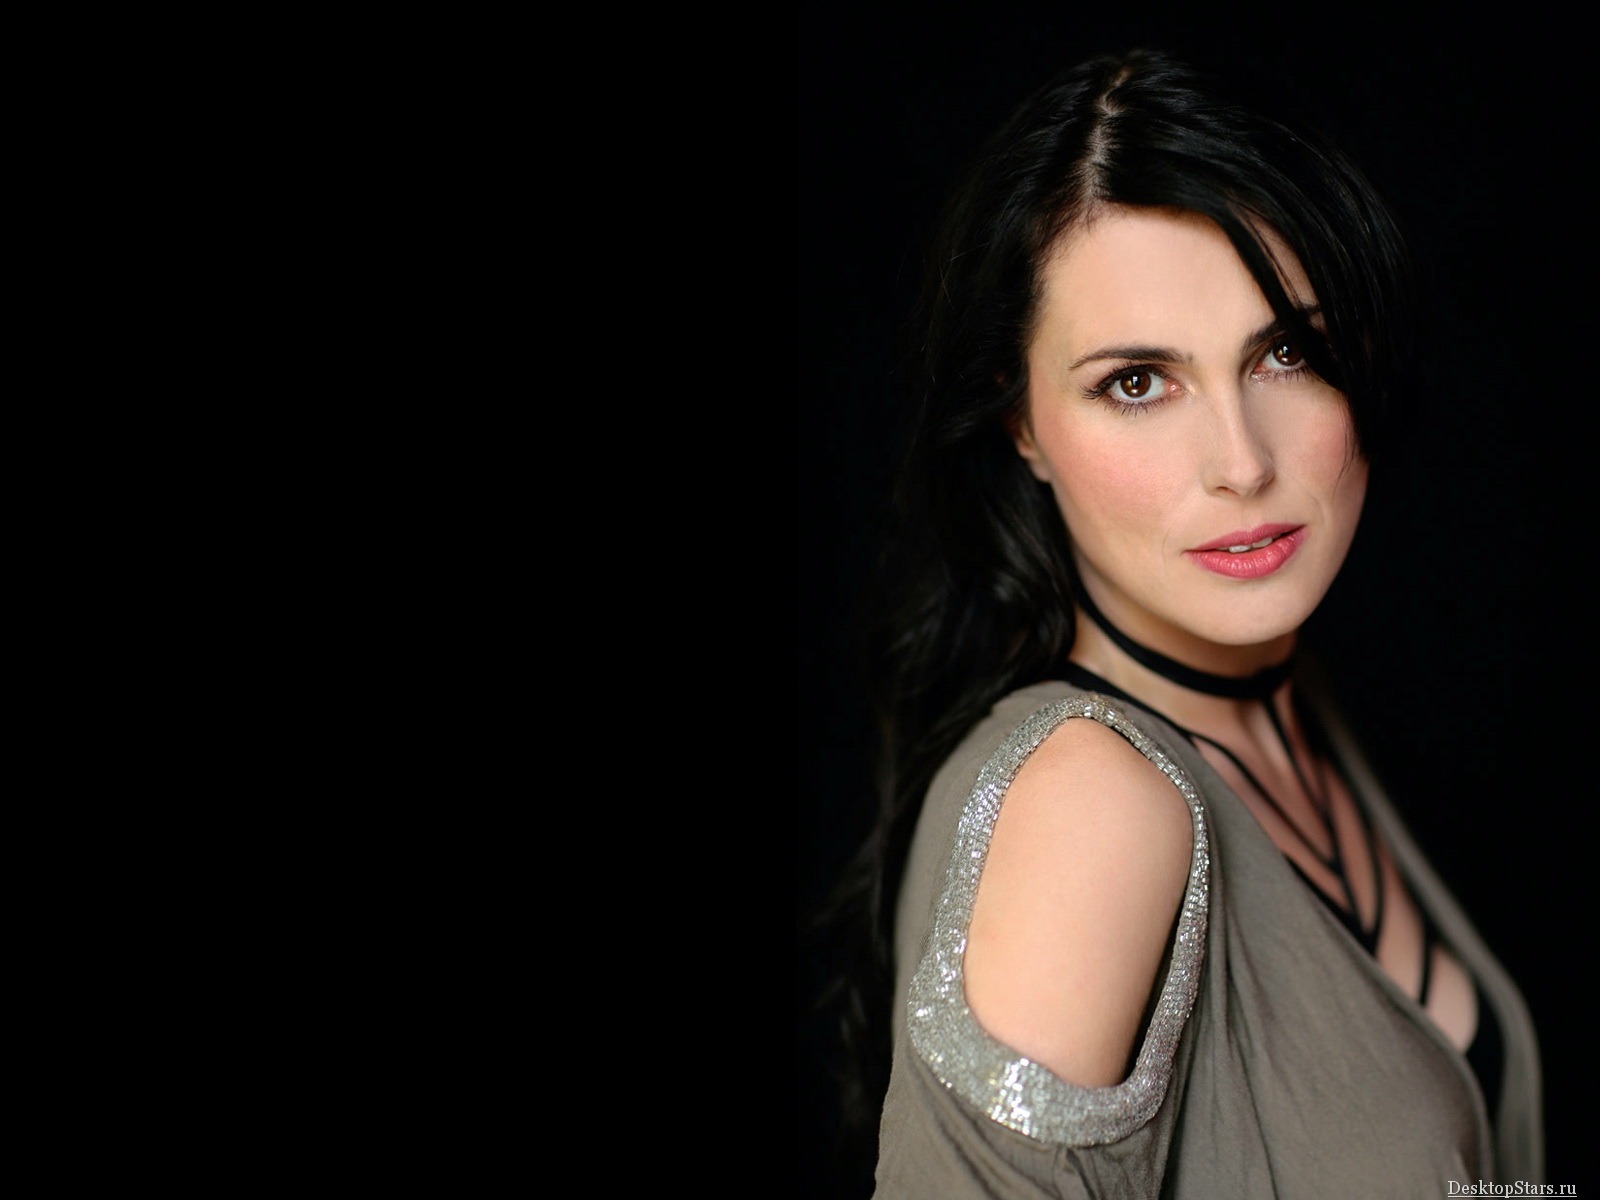 Sharon den Adel #004 - 1600x1200 Wallpapers Pictures Photos Images